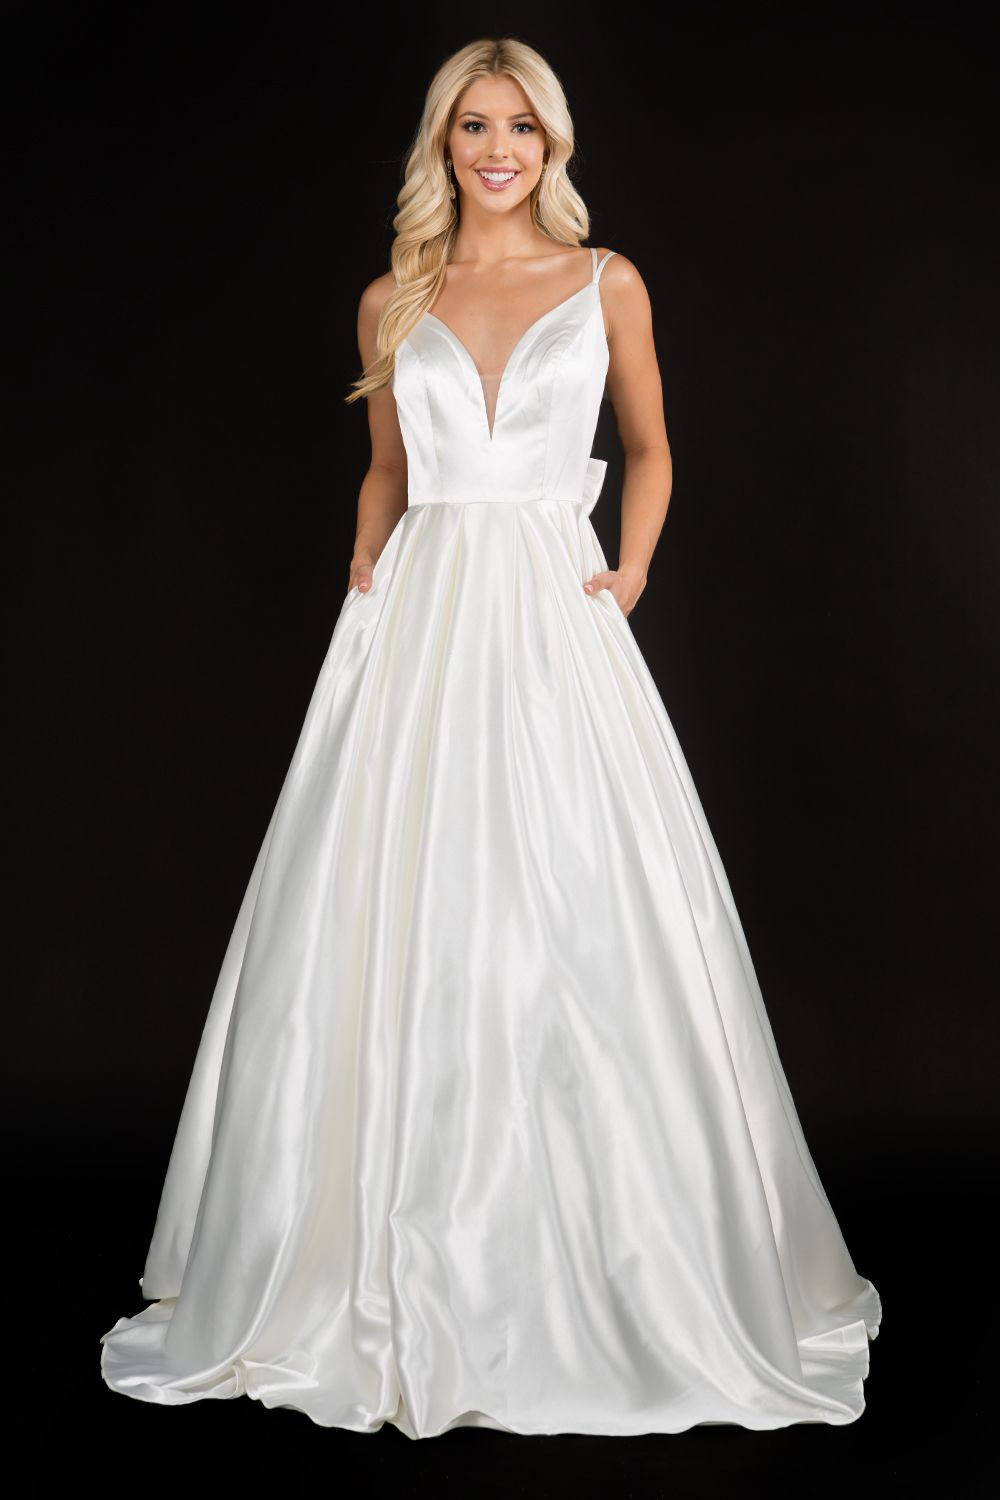 Nina Canacci 6549 Satin bow in back long A line wedding dress bridal gown with plunging v neckline and spaghetti straps Color; Ivory  Sizes  8, 10, 12, 14, 16, 18, 20, 22, 24